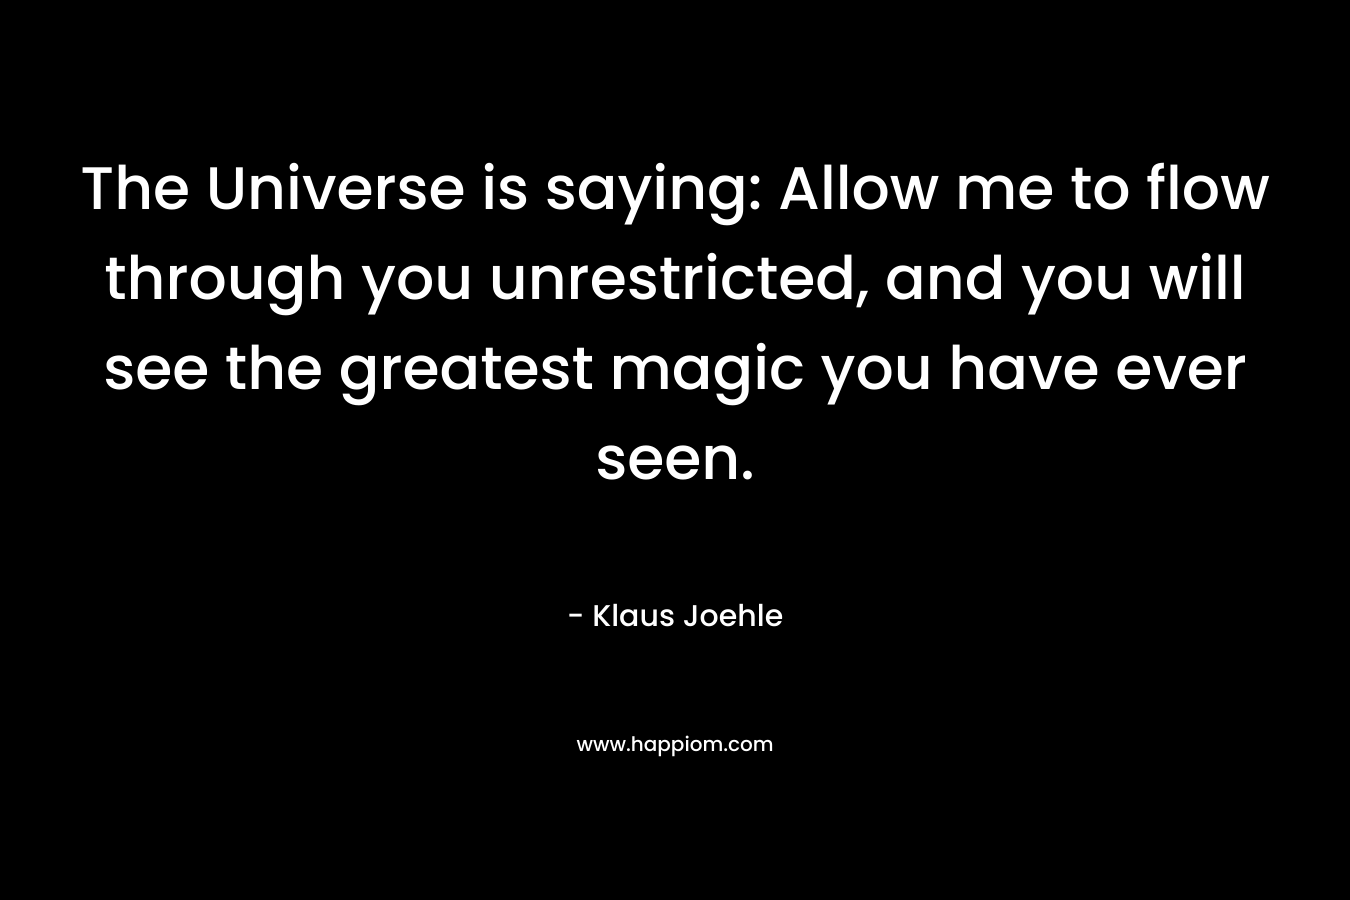 The Universe is saying: Allow me to flow through you unrestricted, and you will see the greatest magic you have ever seen.